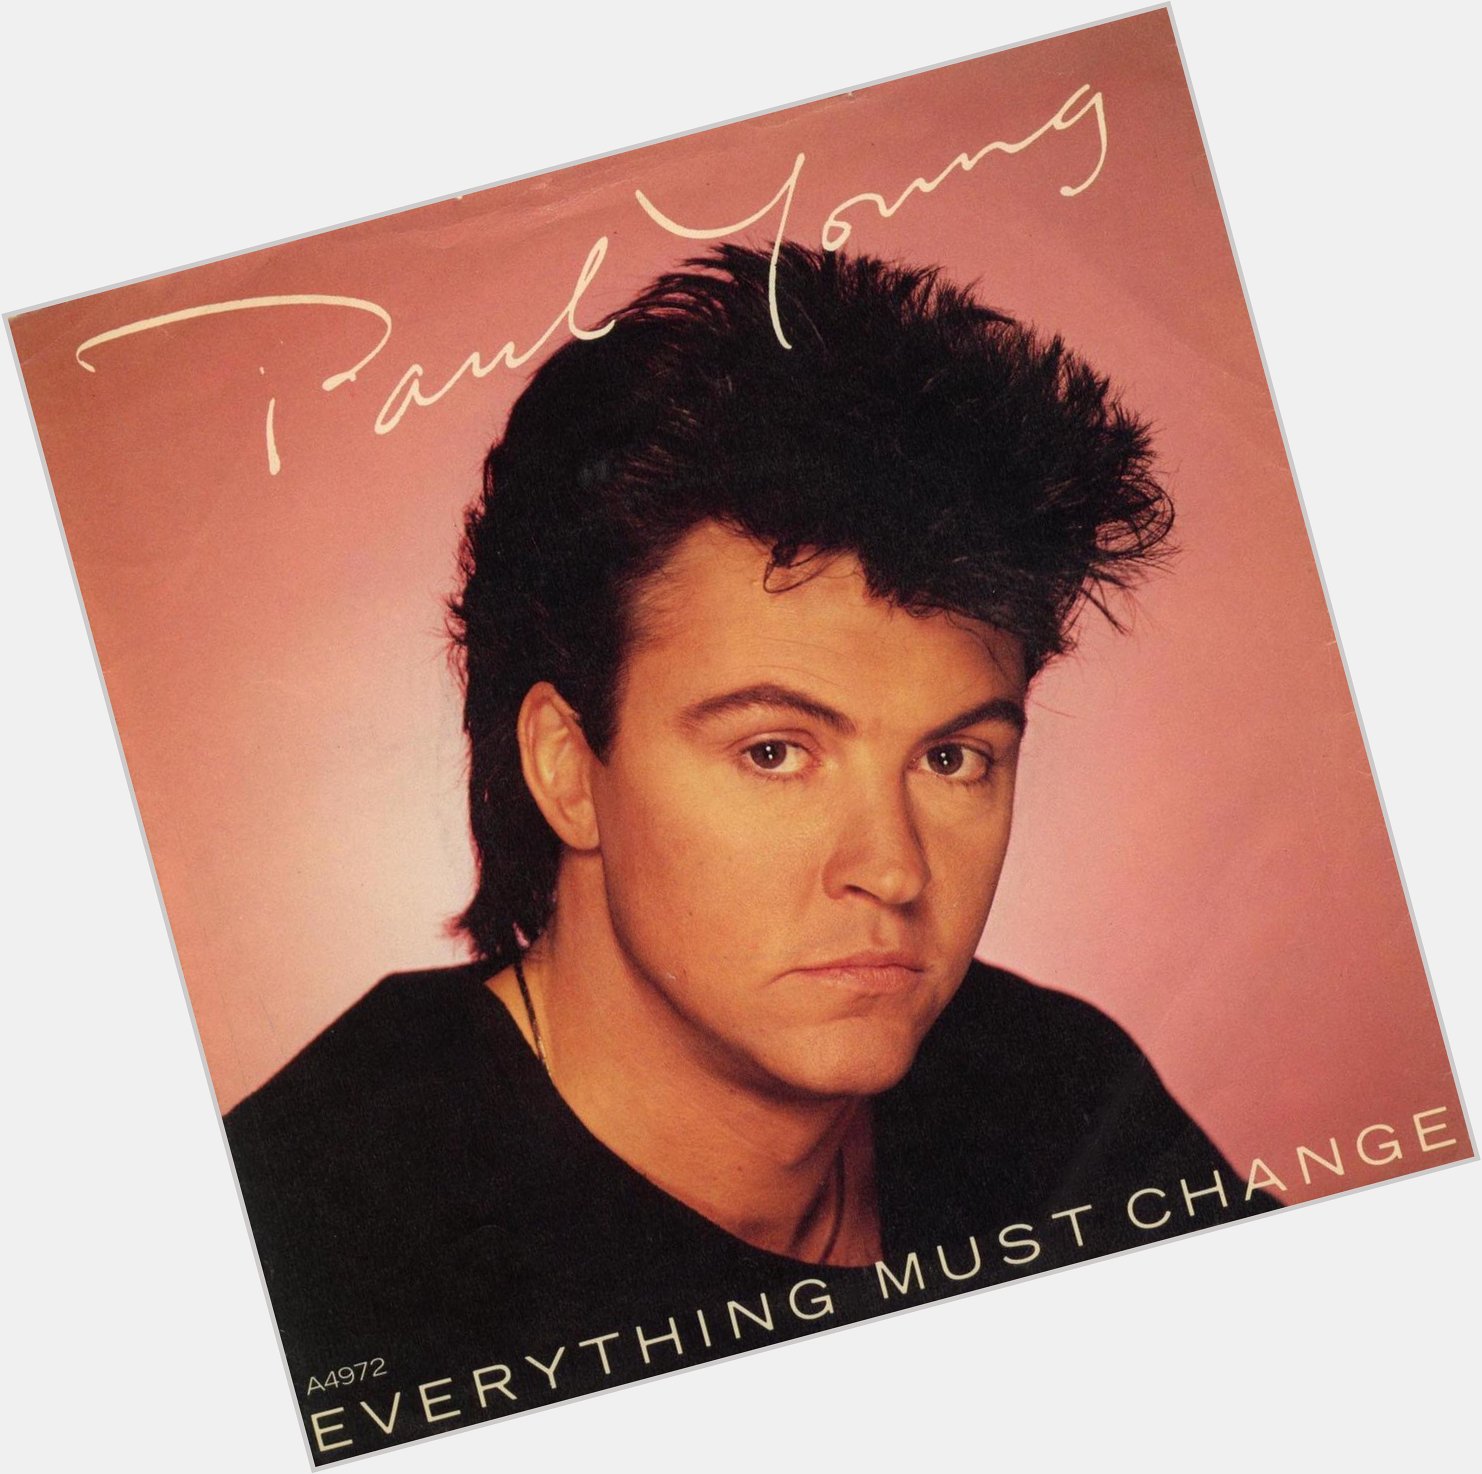 Happy birthday to English singer, songwriter and musician Paul Young, born January 17, 1956. 